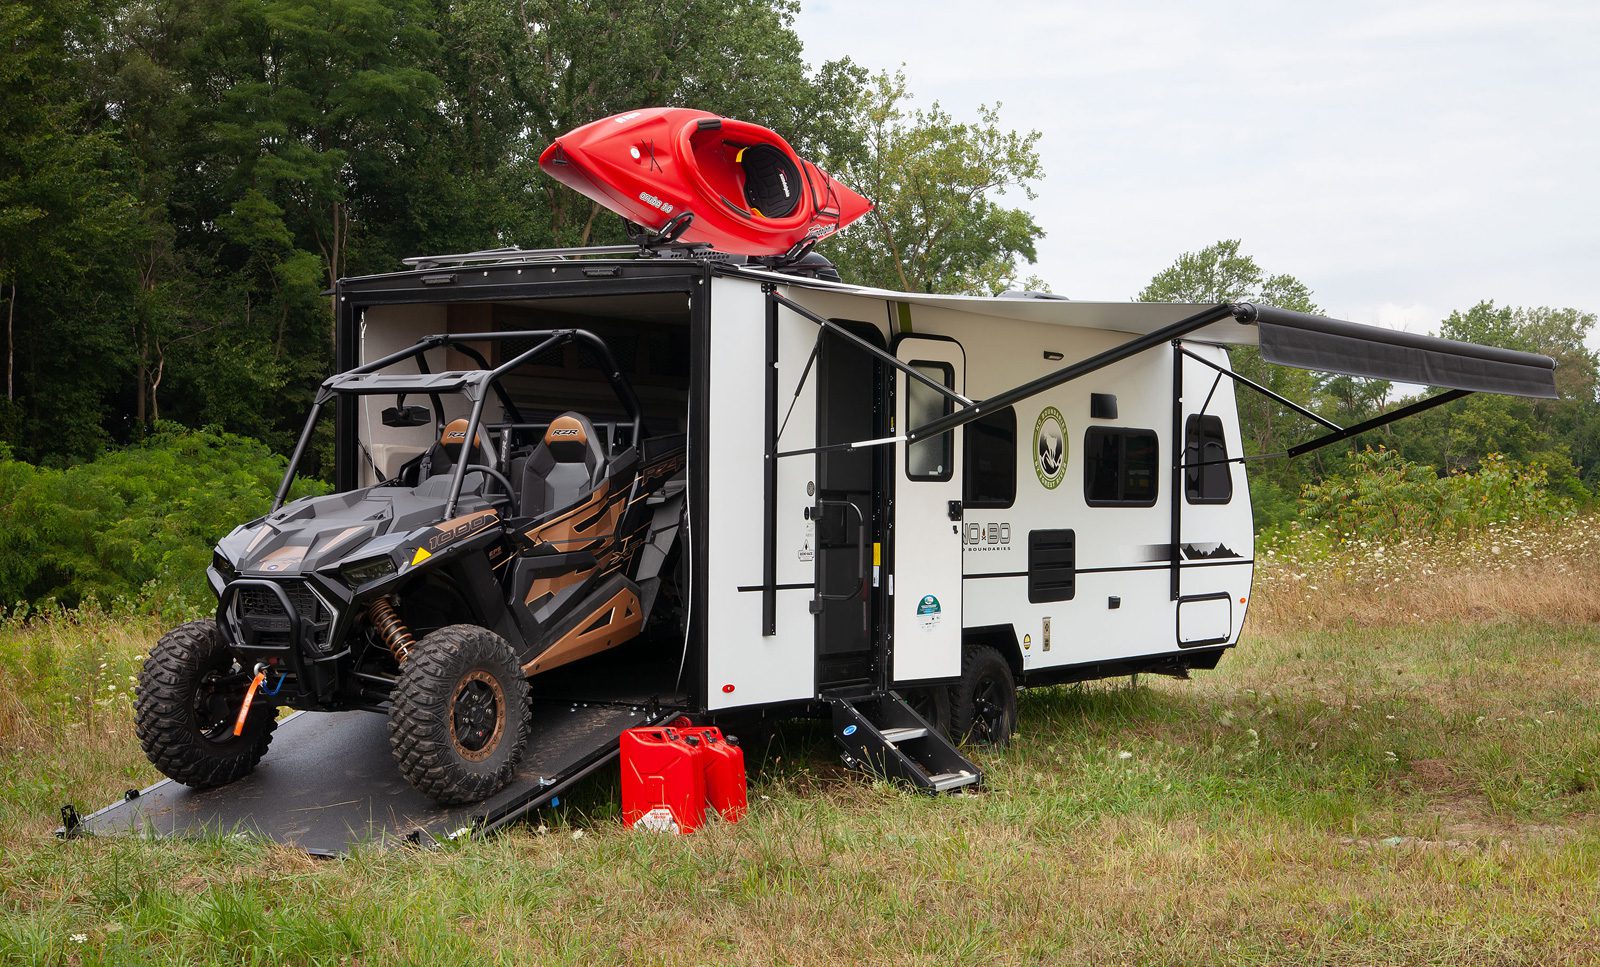 5 Best Small Toy Hauler RVs in 2022